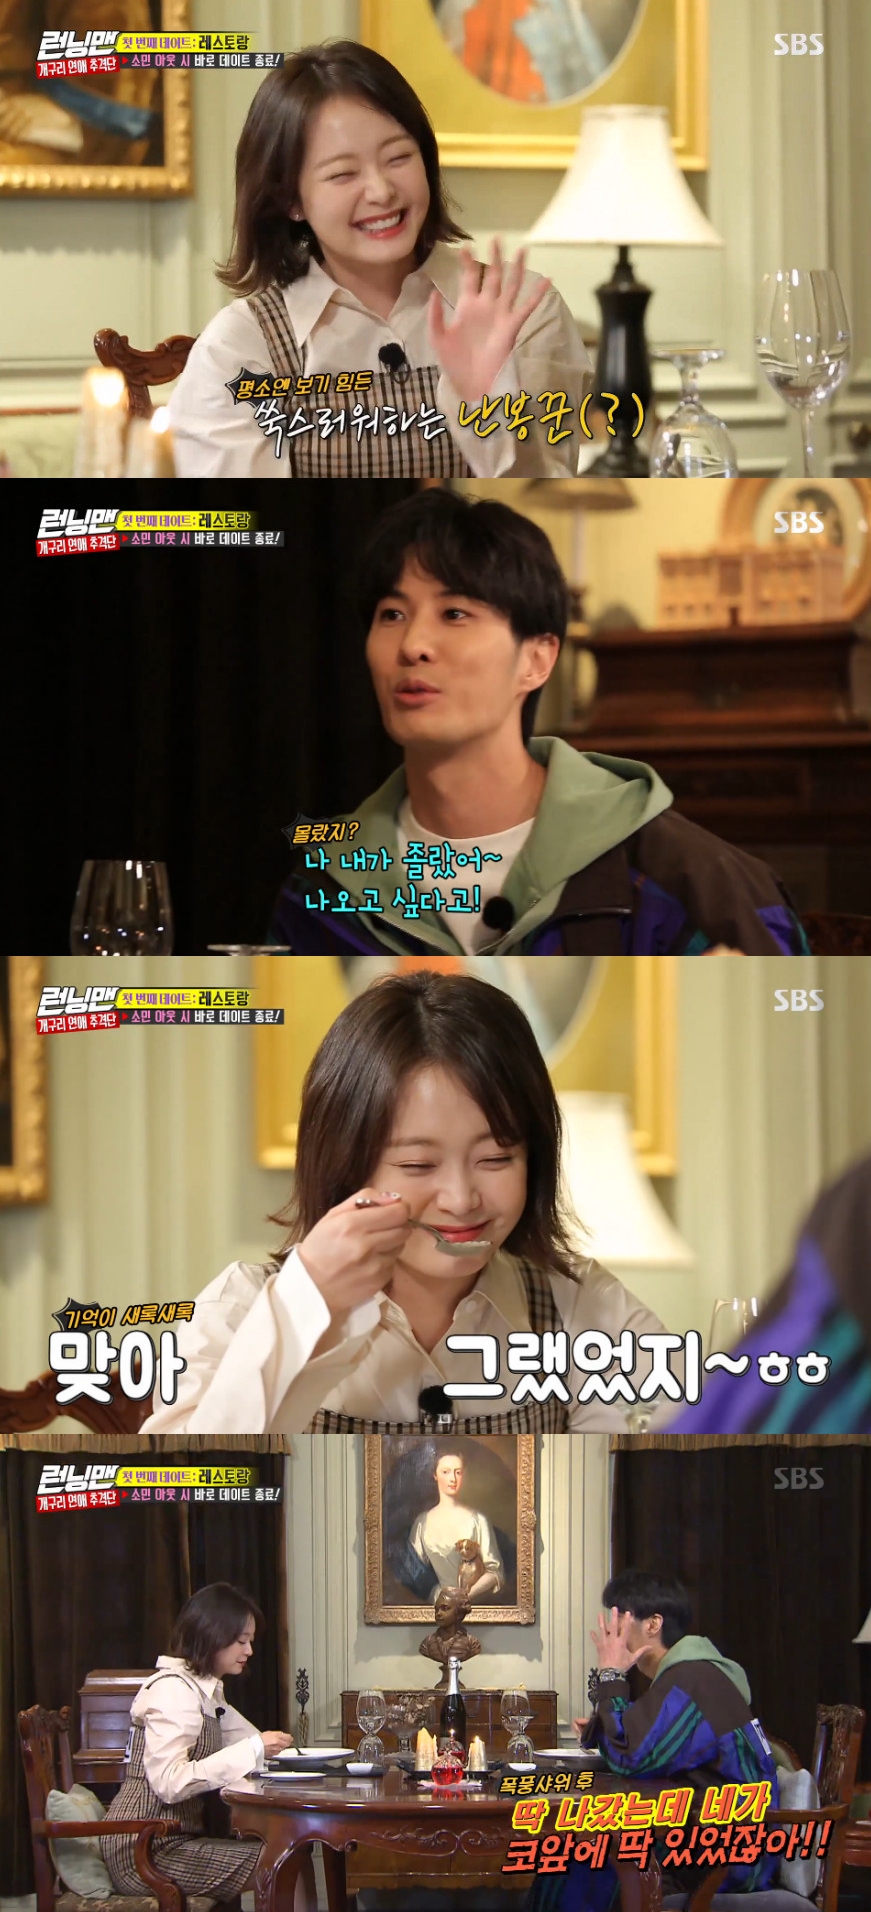 Actors Jeon So-min and Kim Ji-seok, who had a surprise date, gave MBC We Are Married a thrill.On April 7, SBS Running Man, the production team set up a special feature of Real Variety Love to celebrate the birthday of the former.The production team explained, It is a Sulliver love period which means If you do not get excited, throw it away.The production team invited Kim Ji-seok among the male actors who had been breathing in the work. Jeon So-min and Kim Ji-seok appeared together in the TVN drama Top Star Yubaeki which last January.The two men who performed romance at the time were reunited in the entertainment and went on a date.Jeon So-min could not hide his excited expression when Kim Ji-seok appeared in a surprise. Kim Ji-seok praised Jeon So-min as pretty more.Among them, Jeon So-min laughed as he looked at the air and talked without meeting Kim Ji-seoks eyes properly. Kim Ji-seok said, Can not you talk to me?I asked, This is the first time Ive ever had a Running Man. Kim Ji-seok said, Today was another feeling to come to see you.I was nervous when I heard about the date. Kim Ji-seok continued his sweetness and thrilled Jeon So-min several times. I came to date today. I was begging. I want to come out.In addition, in the recent Running Man, Jeon So-min, who said that resonance is closer to his ideal type than Kim Ji-seok, asked him to correct the camera.Kim Ji-seok asked, Did I shoot so hard? Jeon So-min asked, Have you ever been so excited about Jeon So-min while shooting? Kim Ji-seok said, I have been Many times. I wanted to do what you did so, but it goes back to nothing. On the other hand, the rest of the Running Man members such as Yoo Jae-seok, Ji Seok-jin, Lee Kwang-soo, Kim Jong-guk, Yang Se-chan, Haha, and Song Ji-hyo desperately pursued Jeon So-min to prevent the payment of the date cost.Jeon So-min was surprised to hear that the date would be over immediately, as he was told that he had to carry out a penalty to pay for all the dating expenses he had spent when he was caught by the members.hwang hye-jin